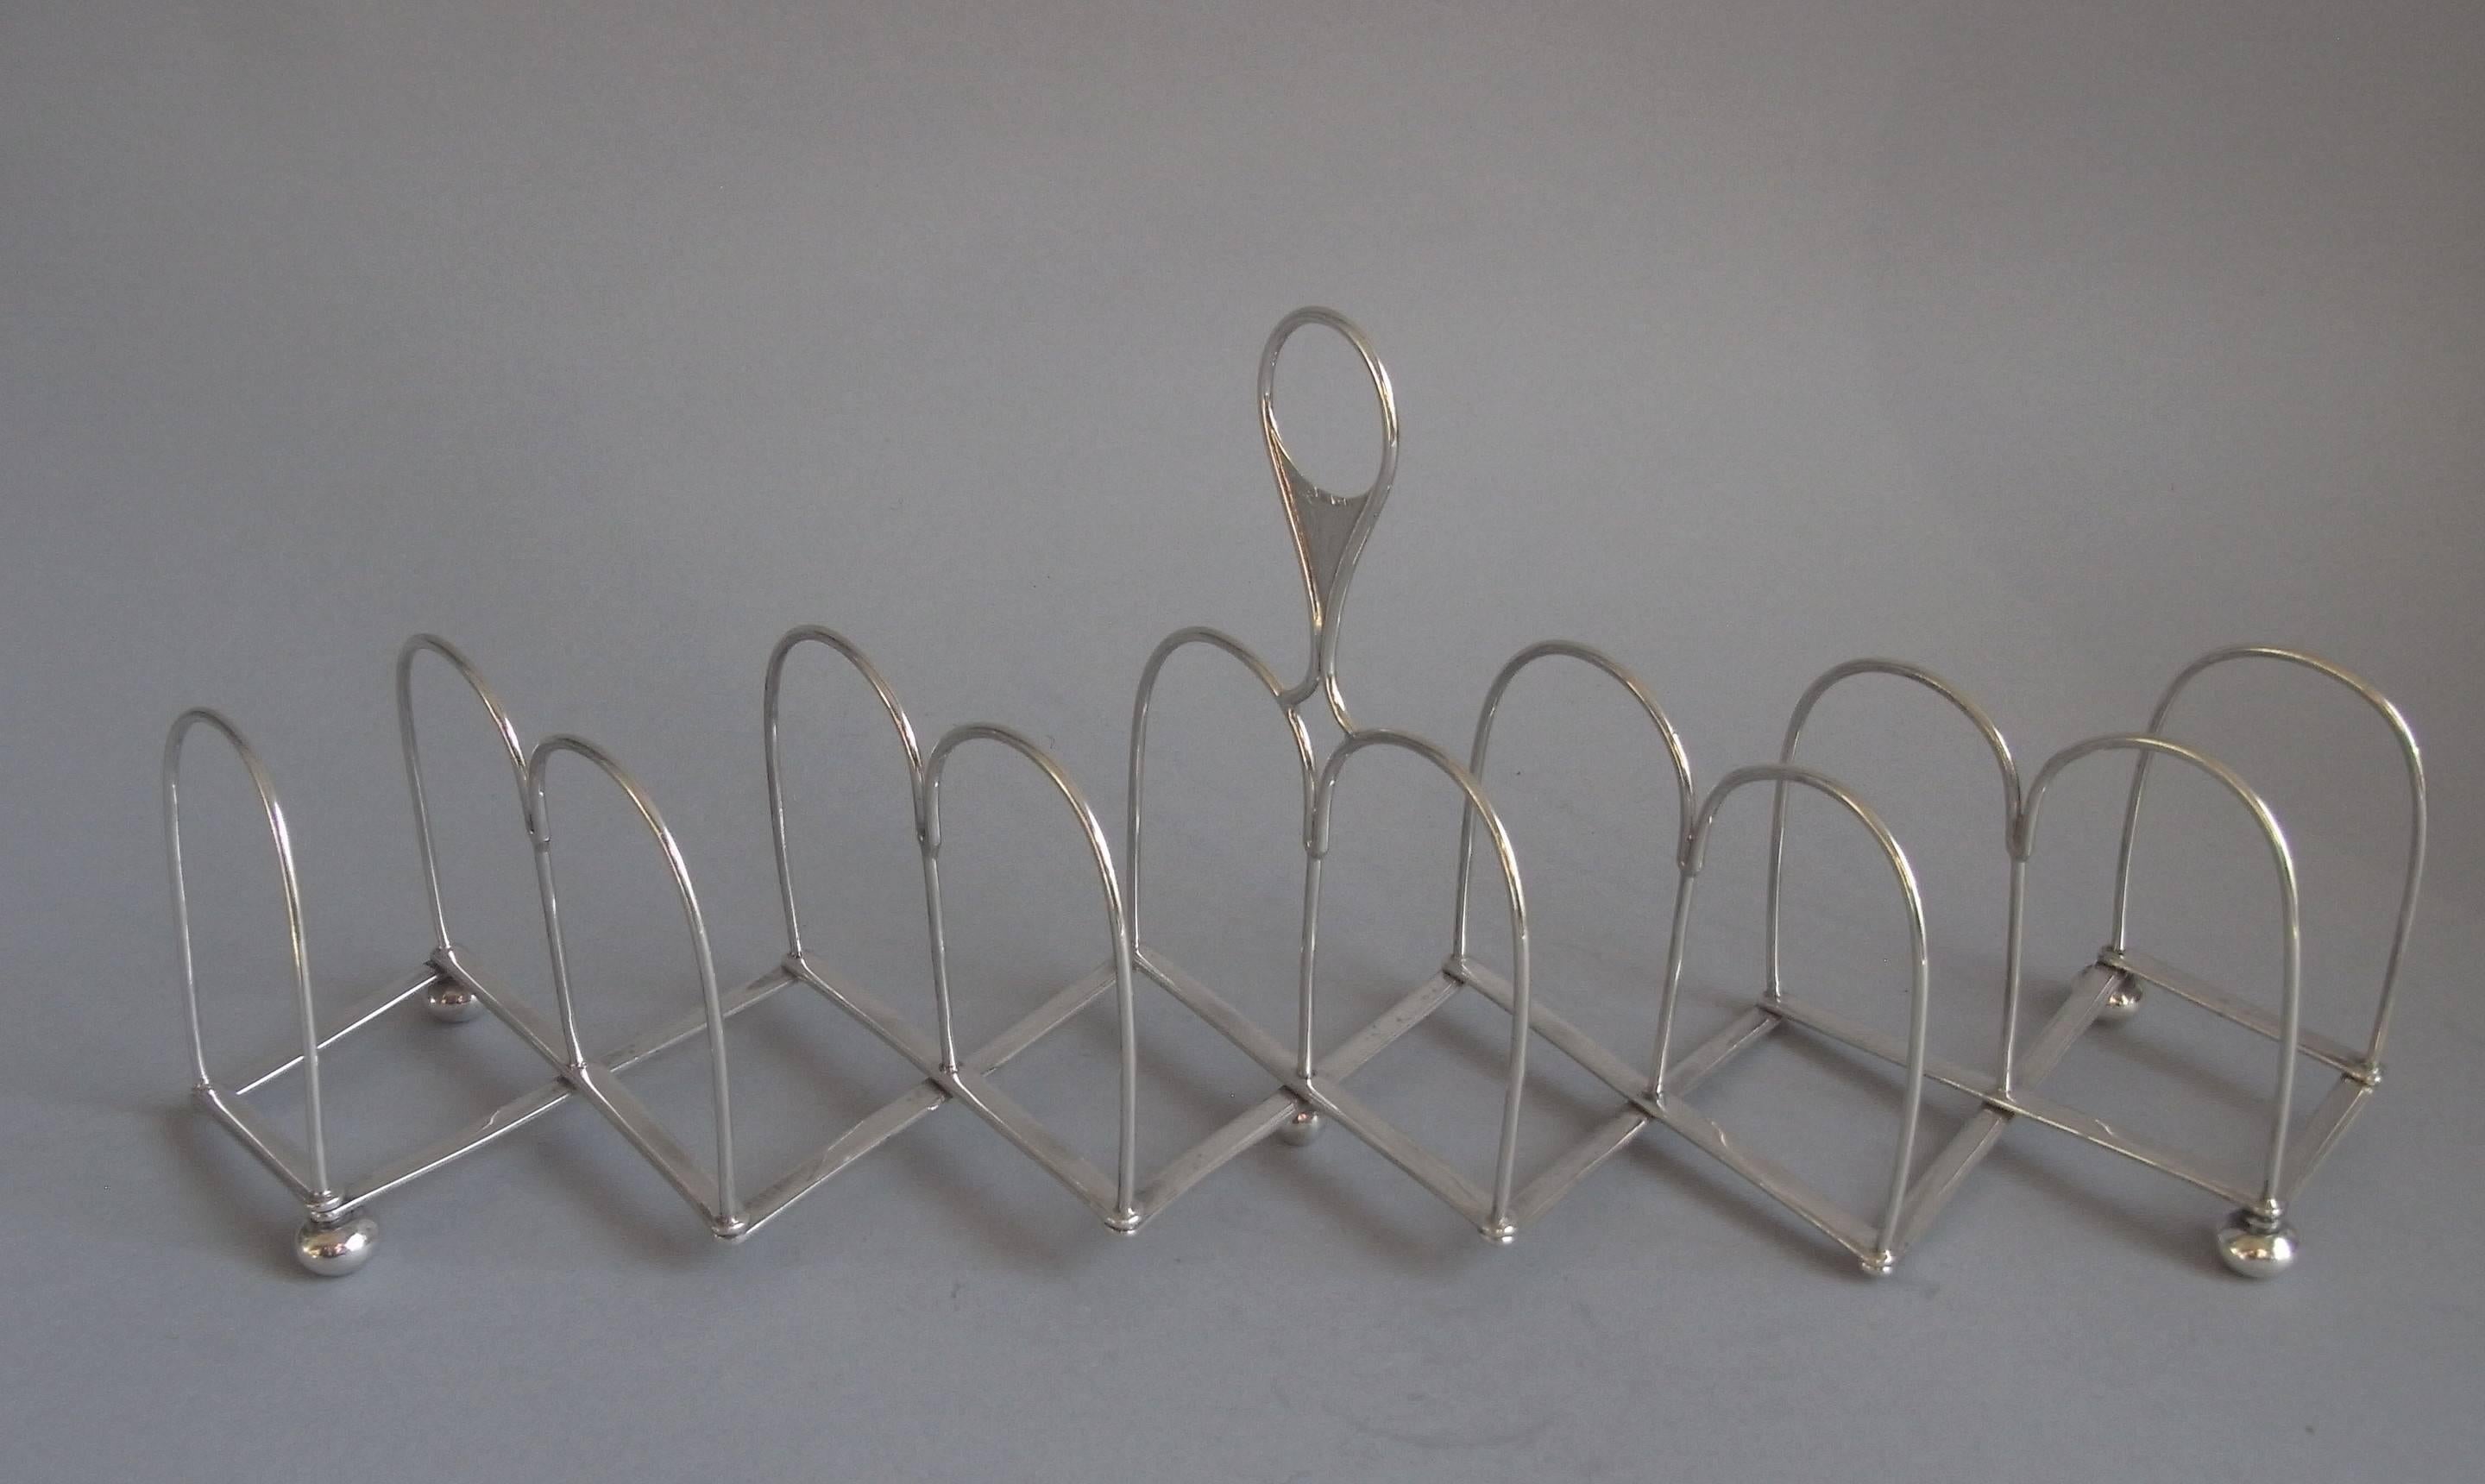 The Toast Rack is of the rare Concertina design and can extend to various sizes. This example stands on four ball feet and has a plain double arch design. It displays a raised central circular carrying handle. The base is engraved with R.C. & Co